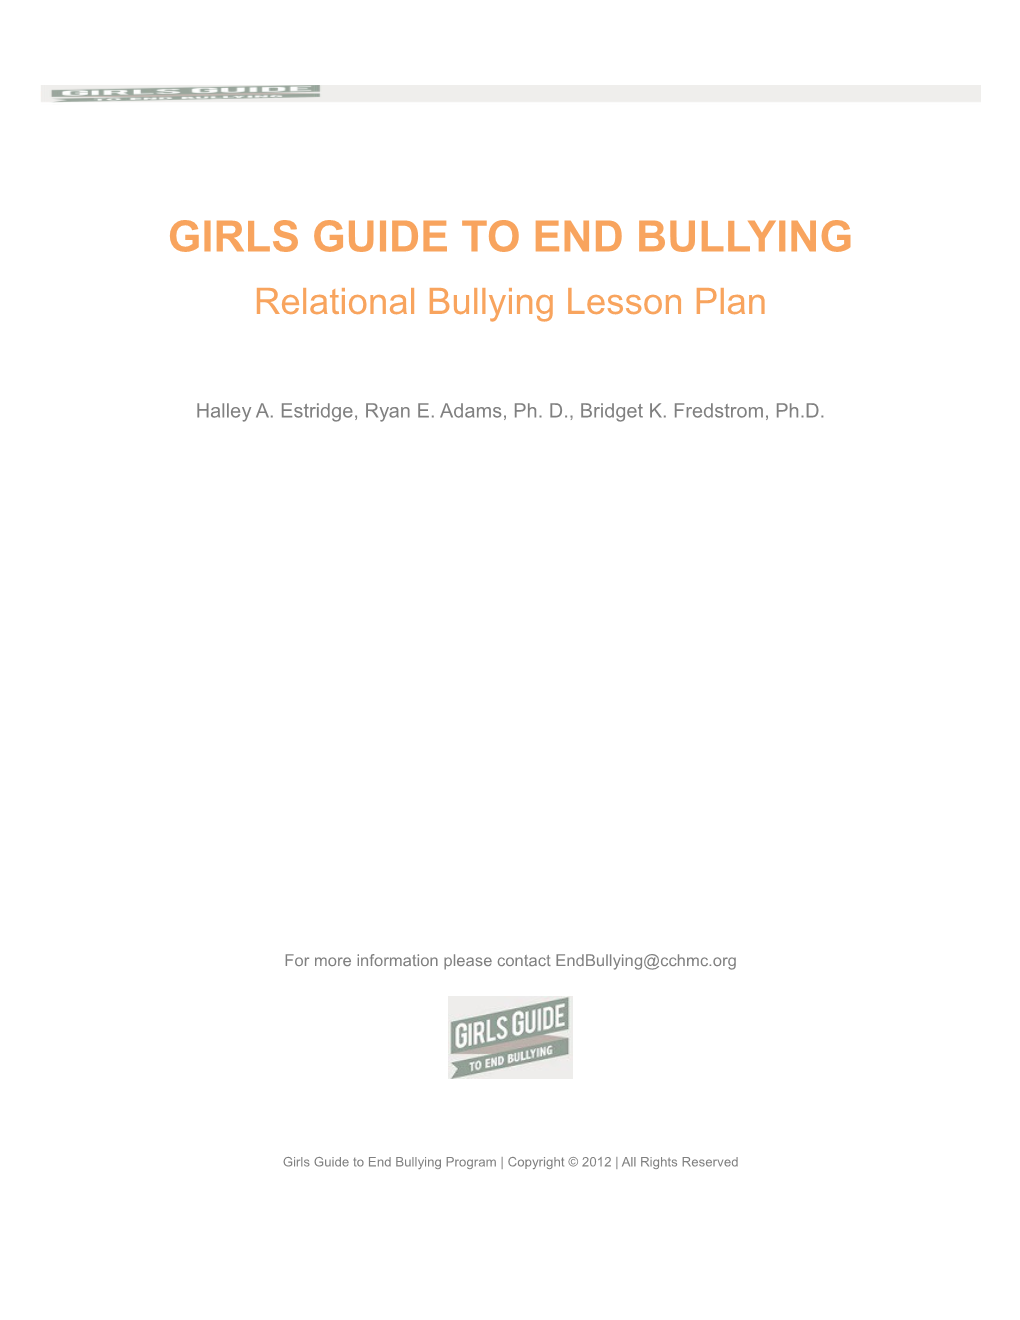 Girls Guide to End Bullying